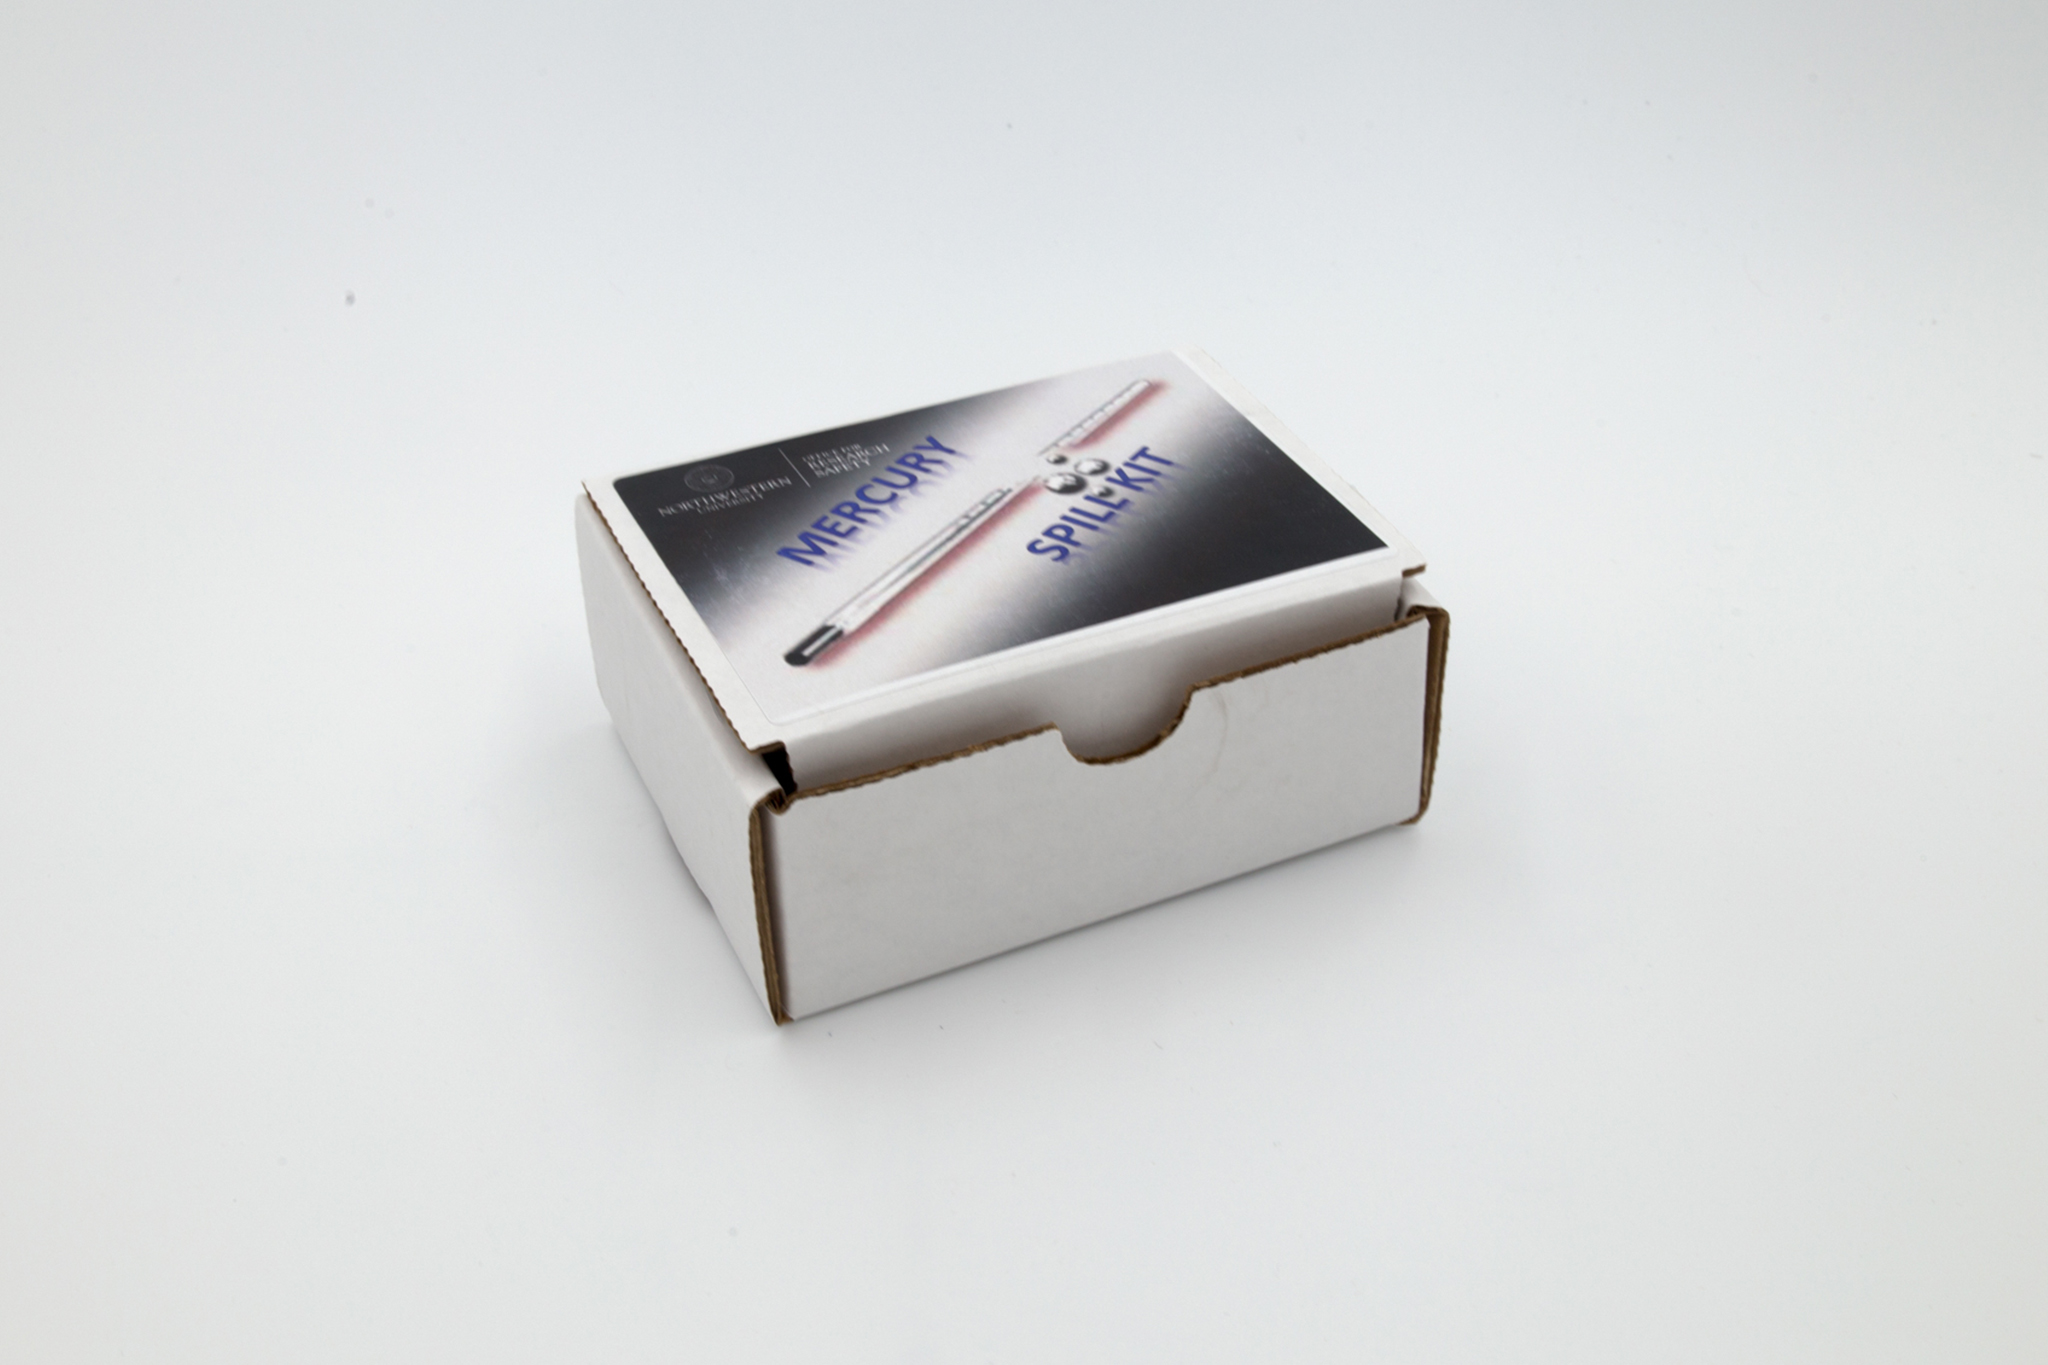 Cardboard box with mercury spill kit inside on white background